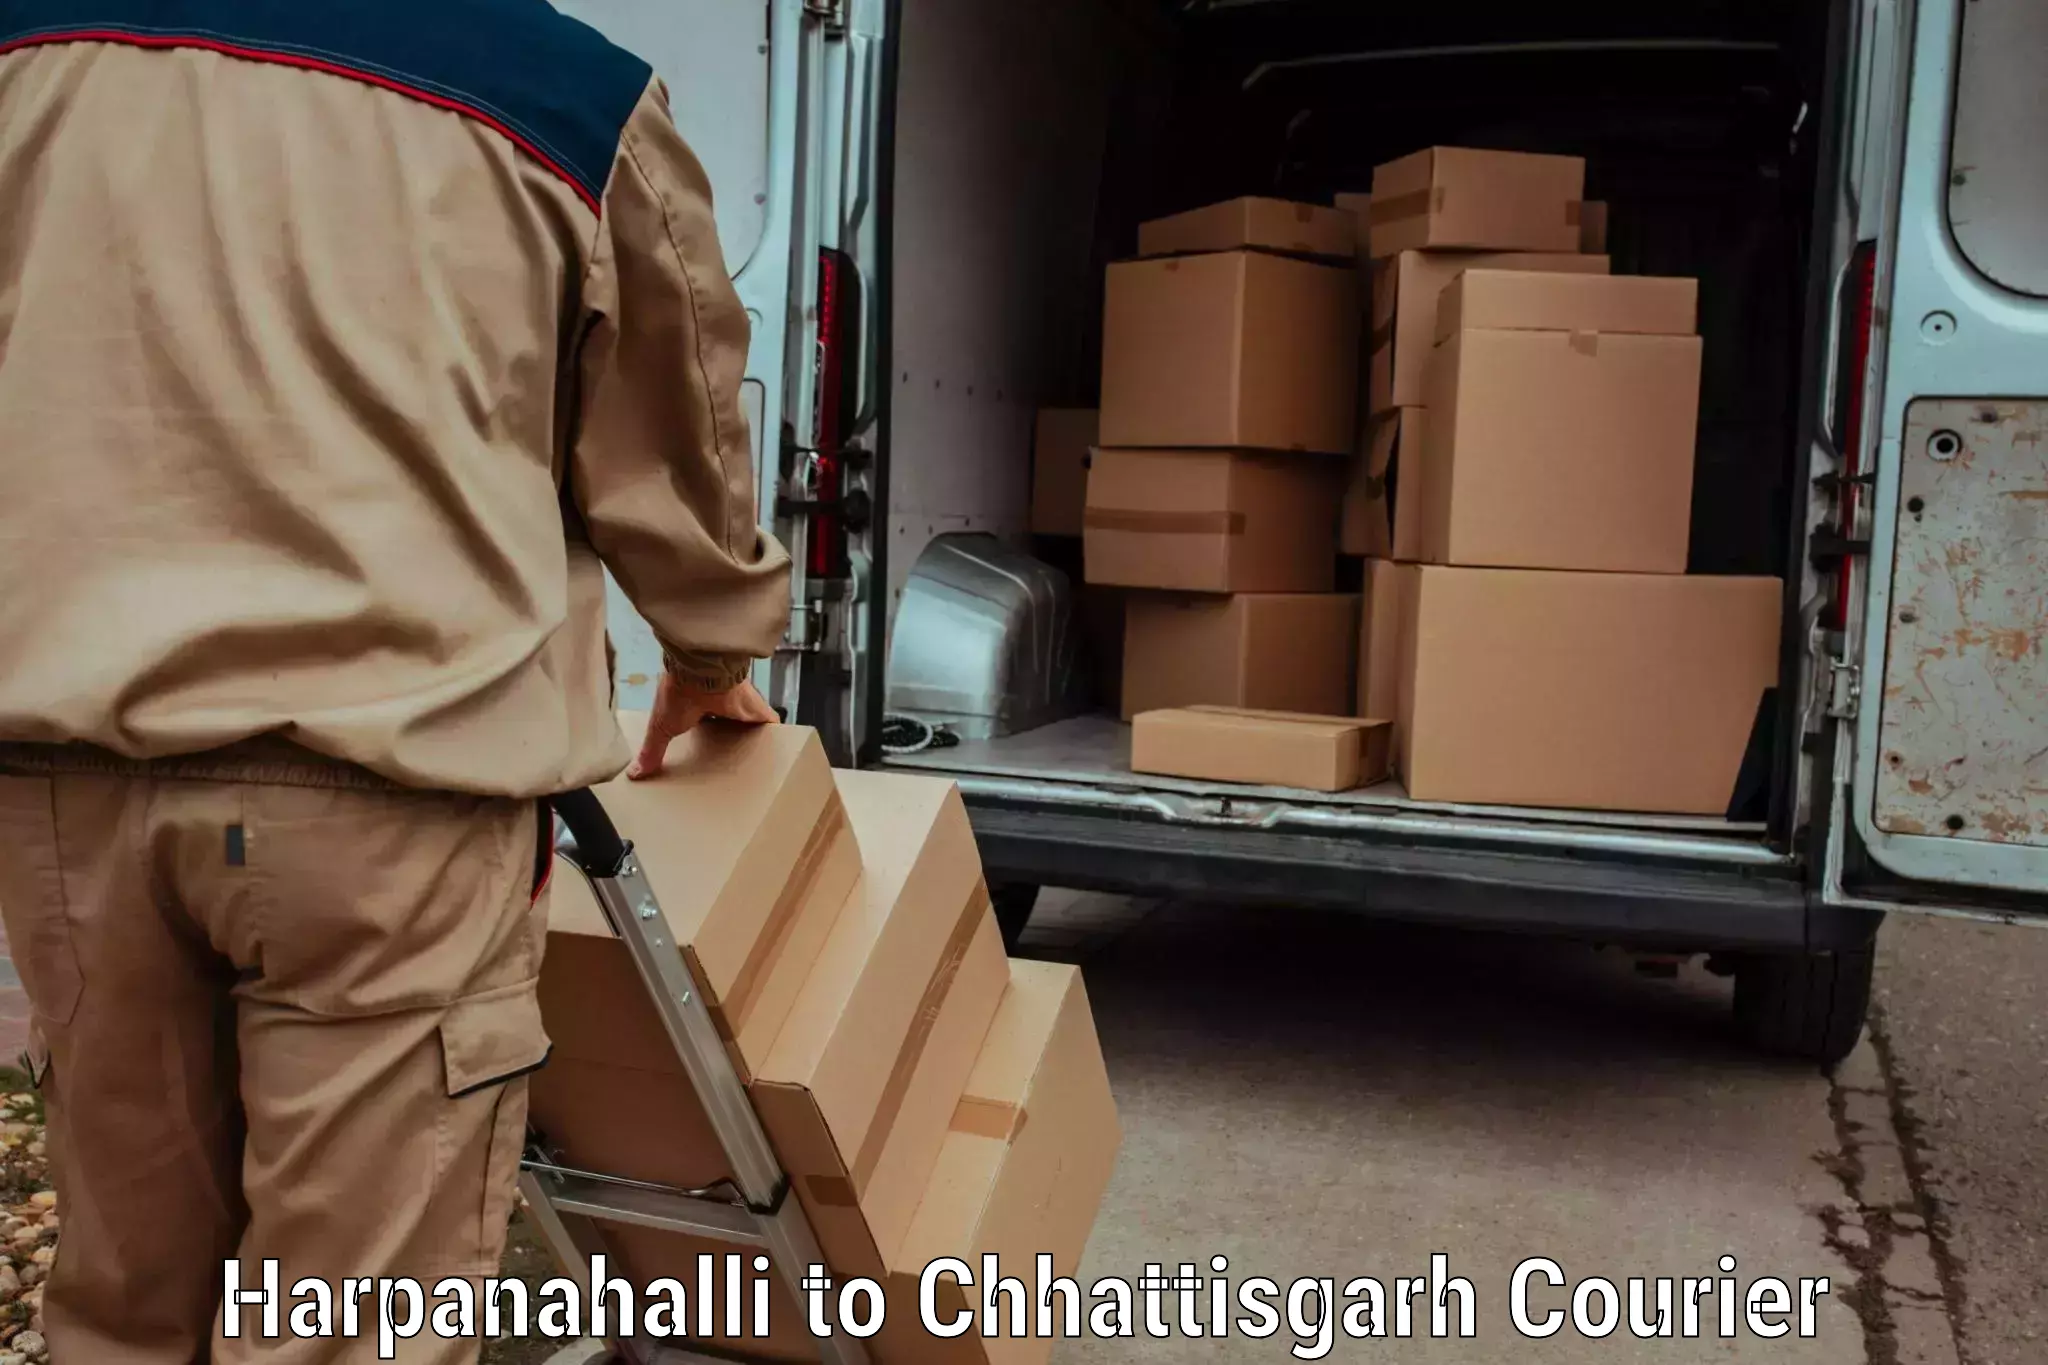 Courier service innovation Harpanahalli to Dongargarh